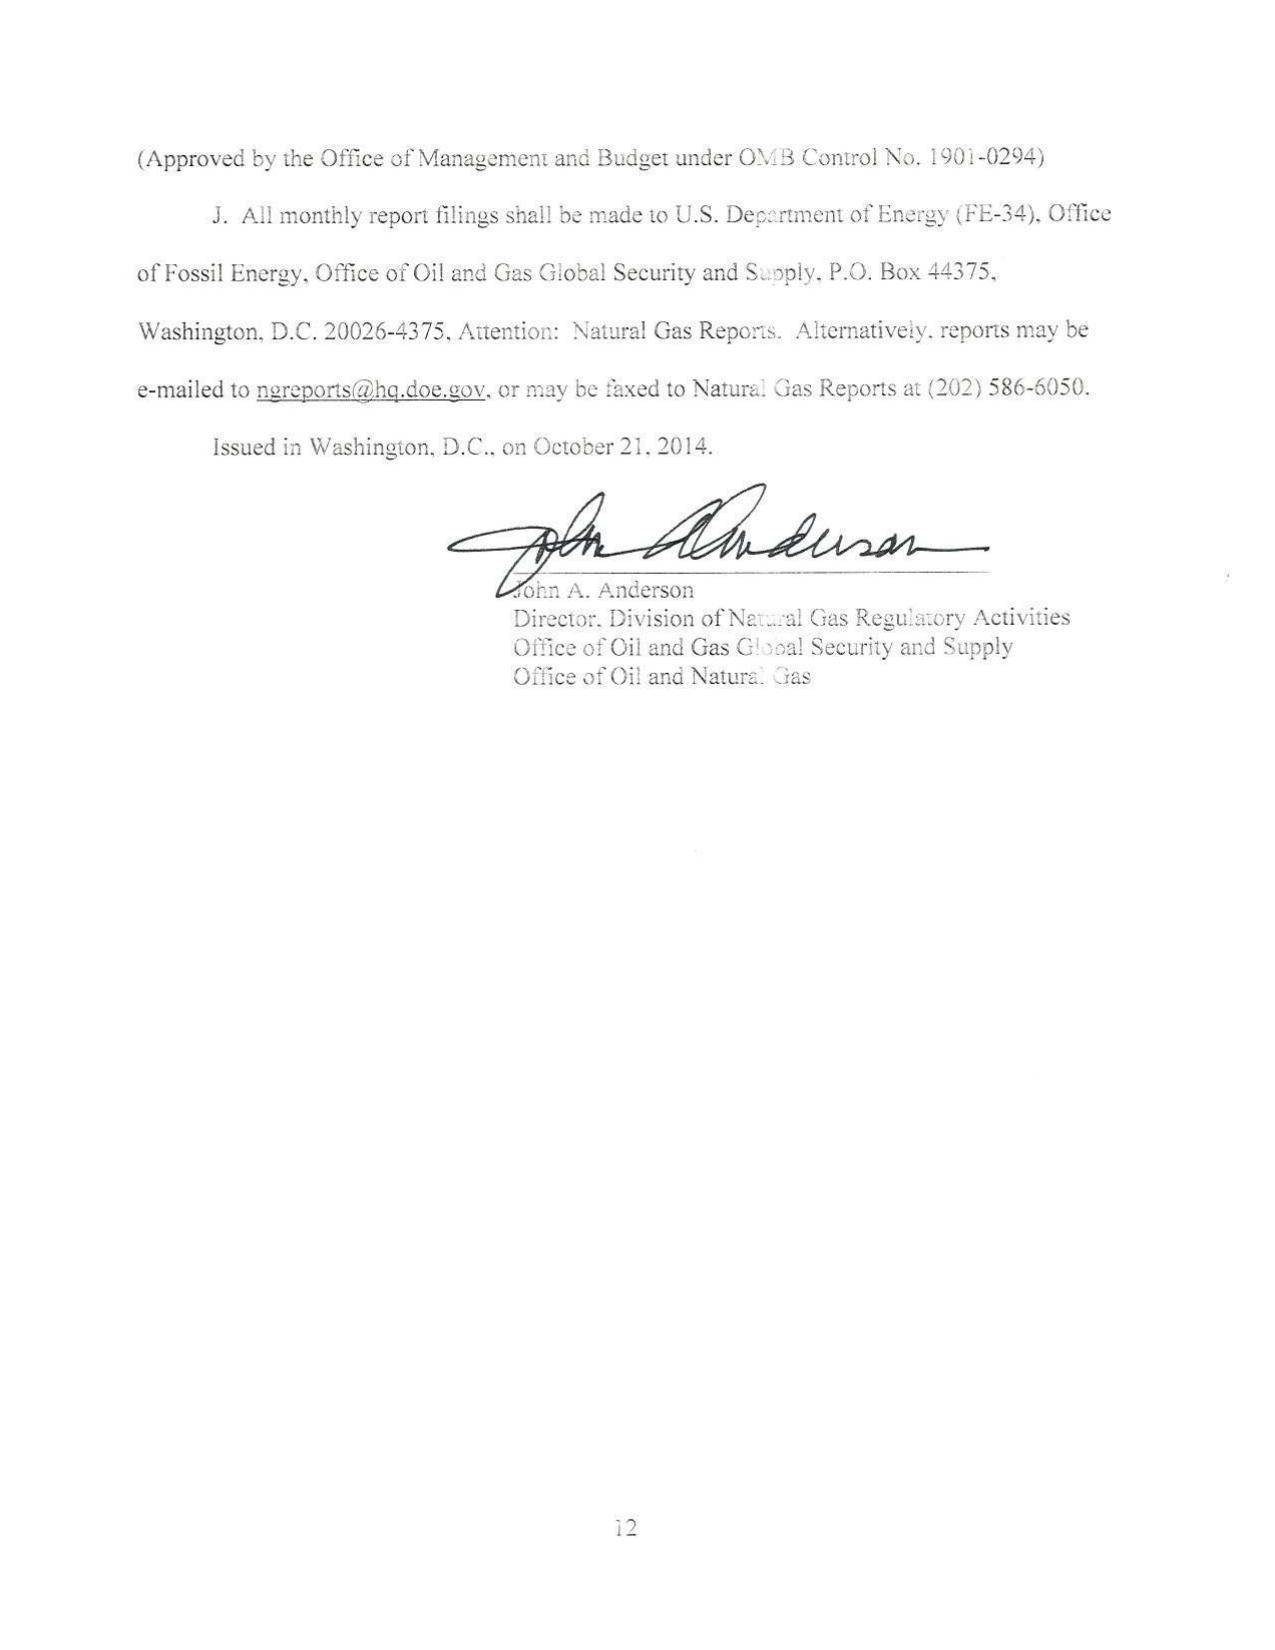 1275x1650 Signature, John A. Anderson, in Strom Crystal River LNG export approval, by Office of Fossil Energy, for SpectraBusters.org, 21 October 2014